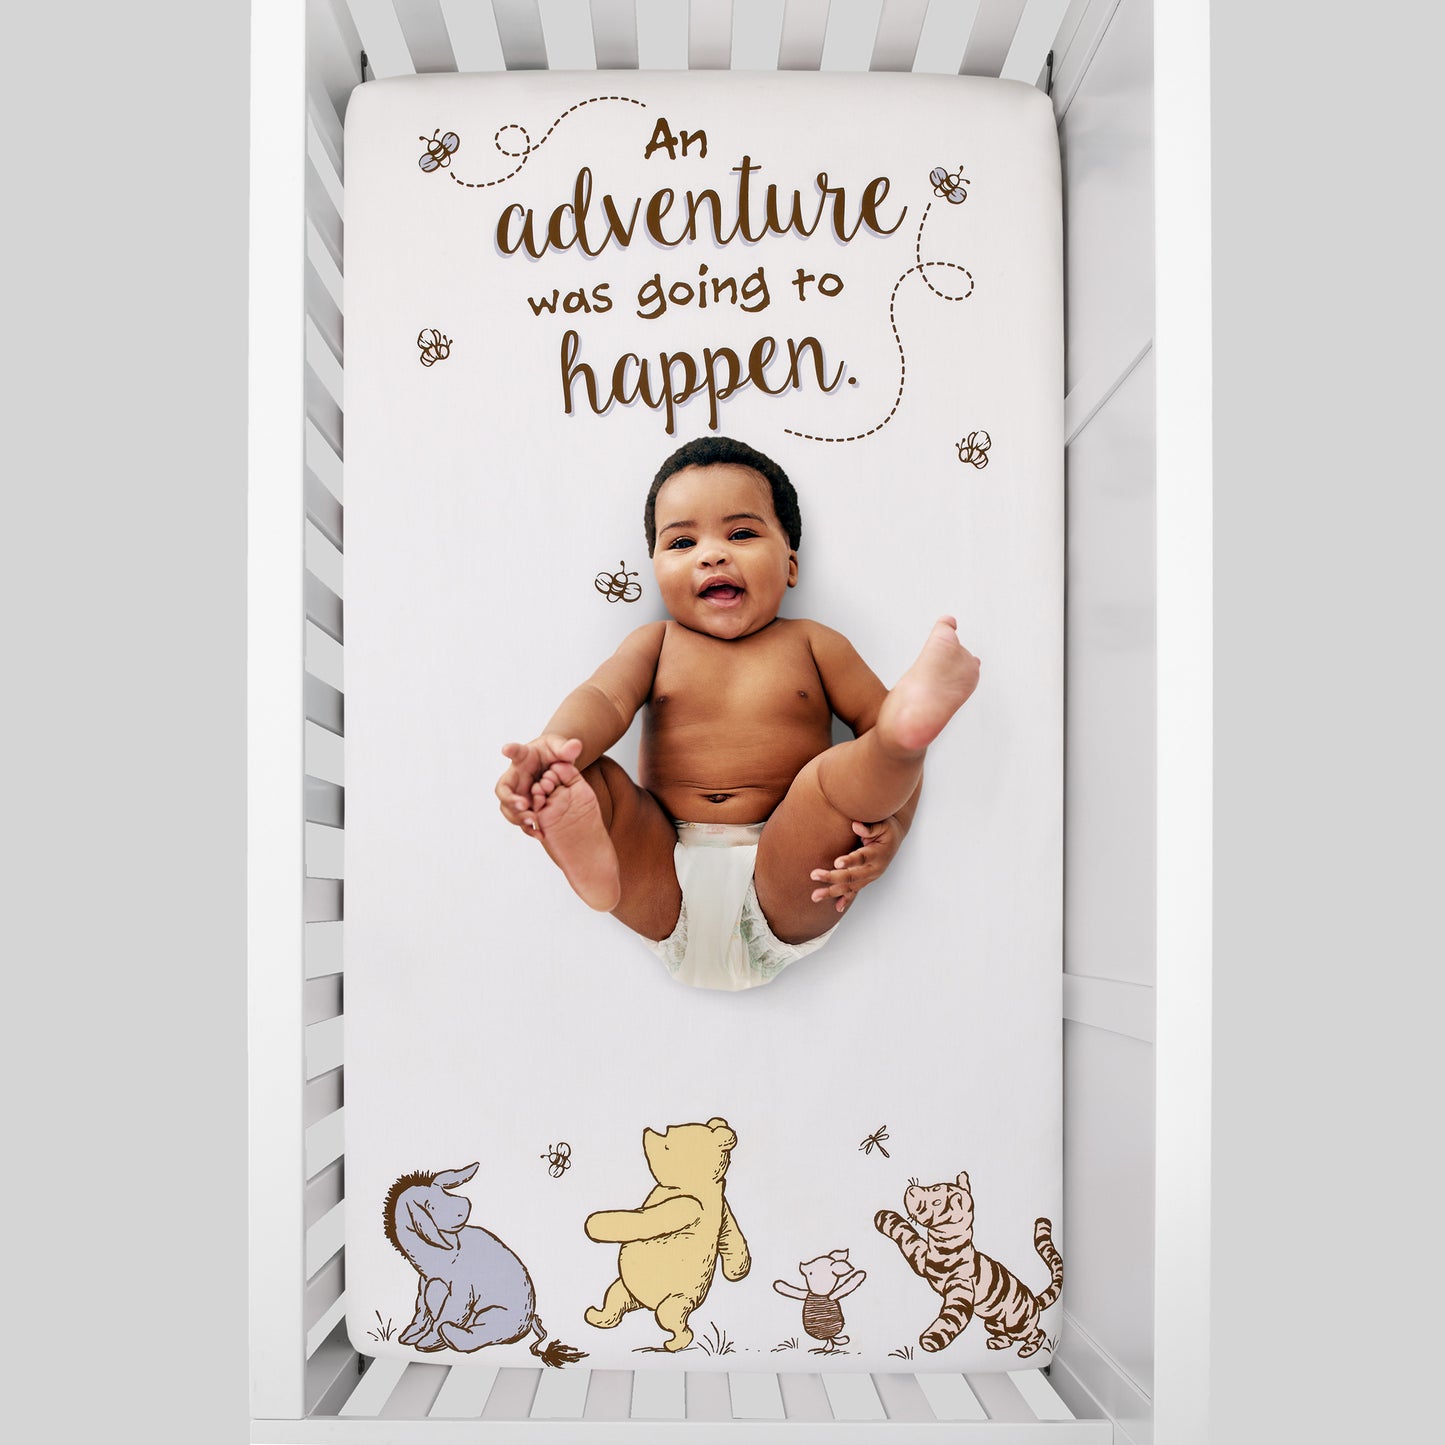 Disney Classic Pooh Hunny Fun with Piglet, Eeyore and Tigger White 100% Cotton Photo Op Nursery Fitted Crib Sheet